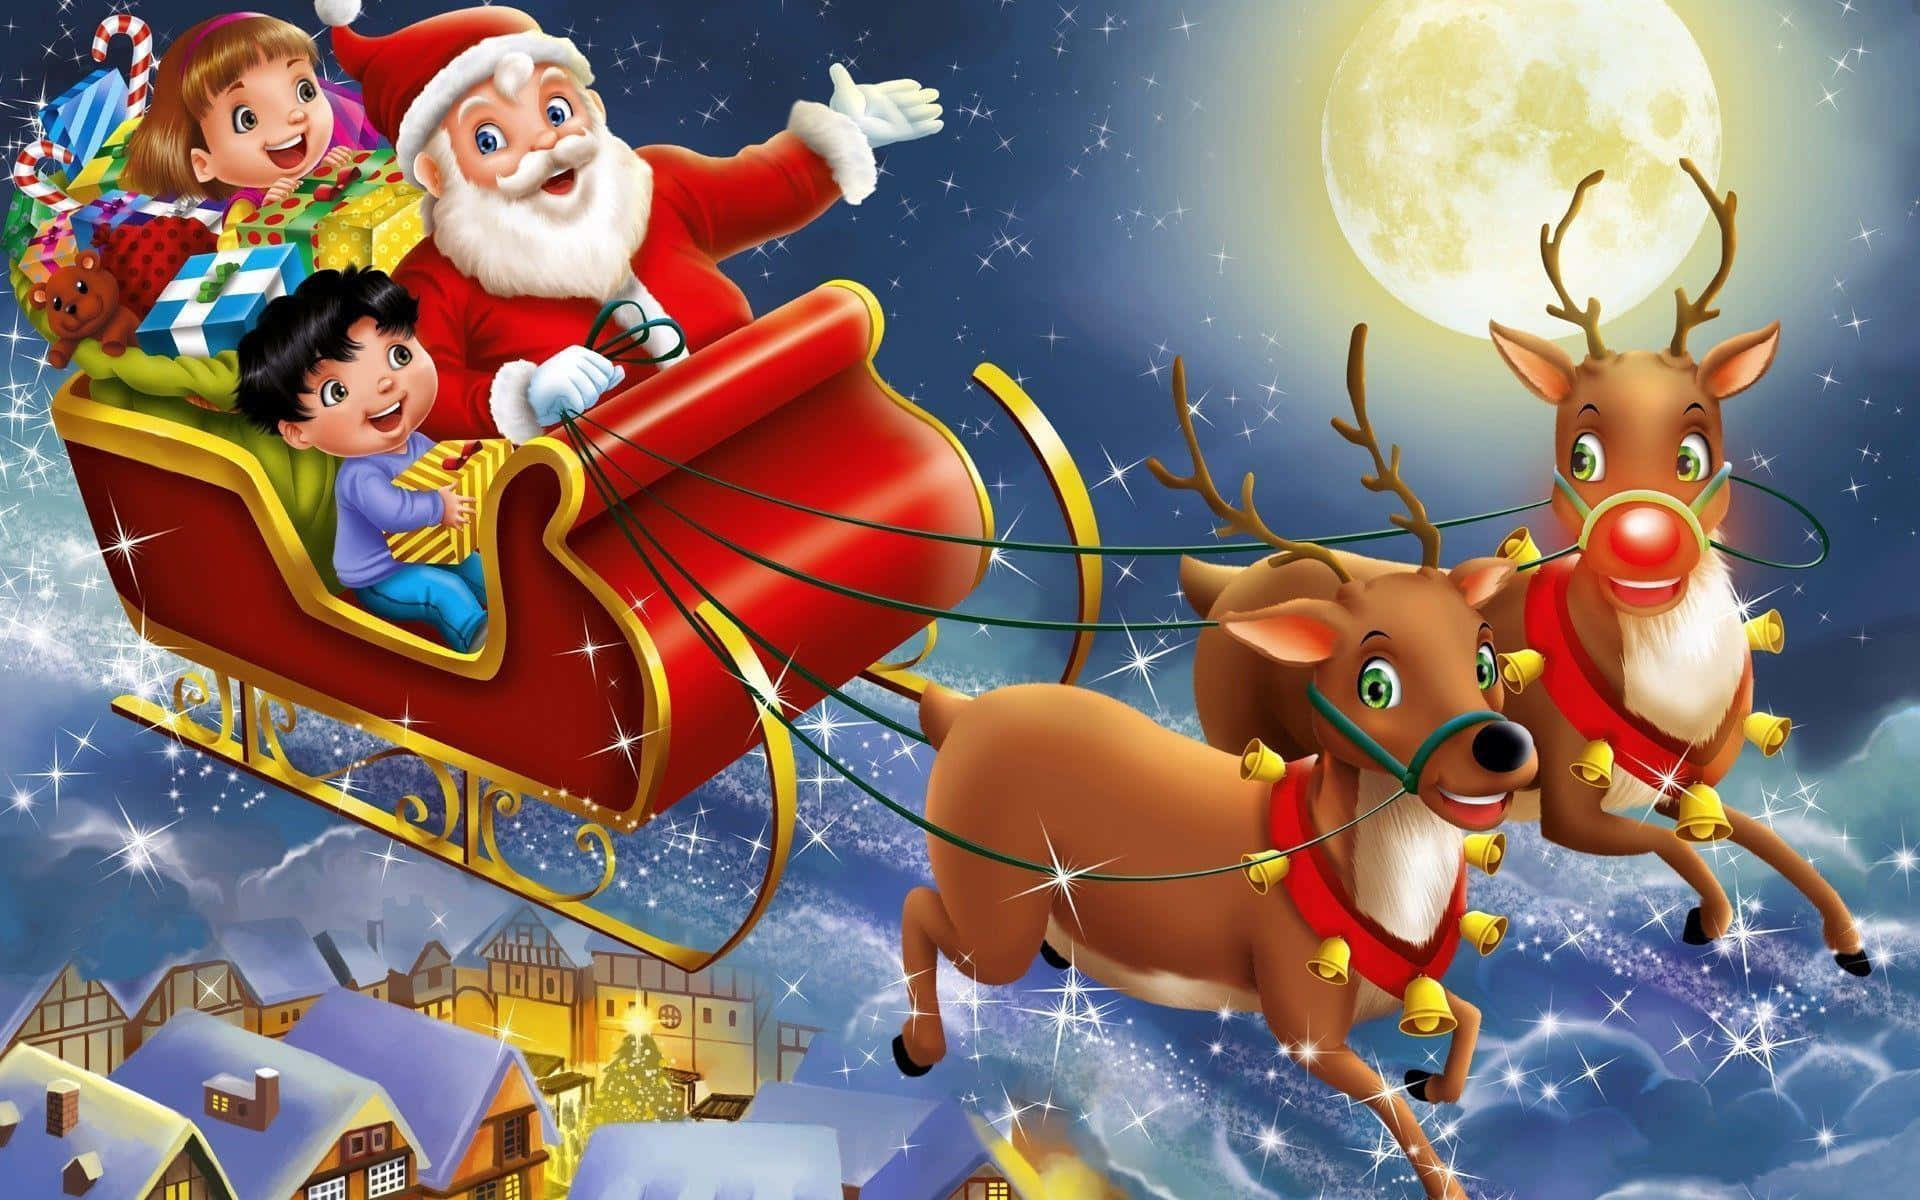 Santa Claus joyfully riding his sleigh with presents against a magical starry night